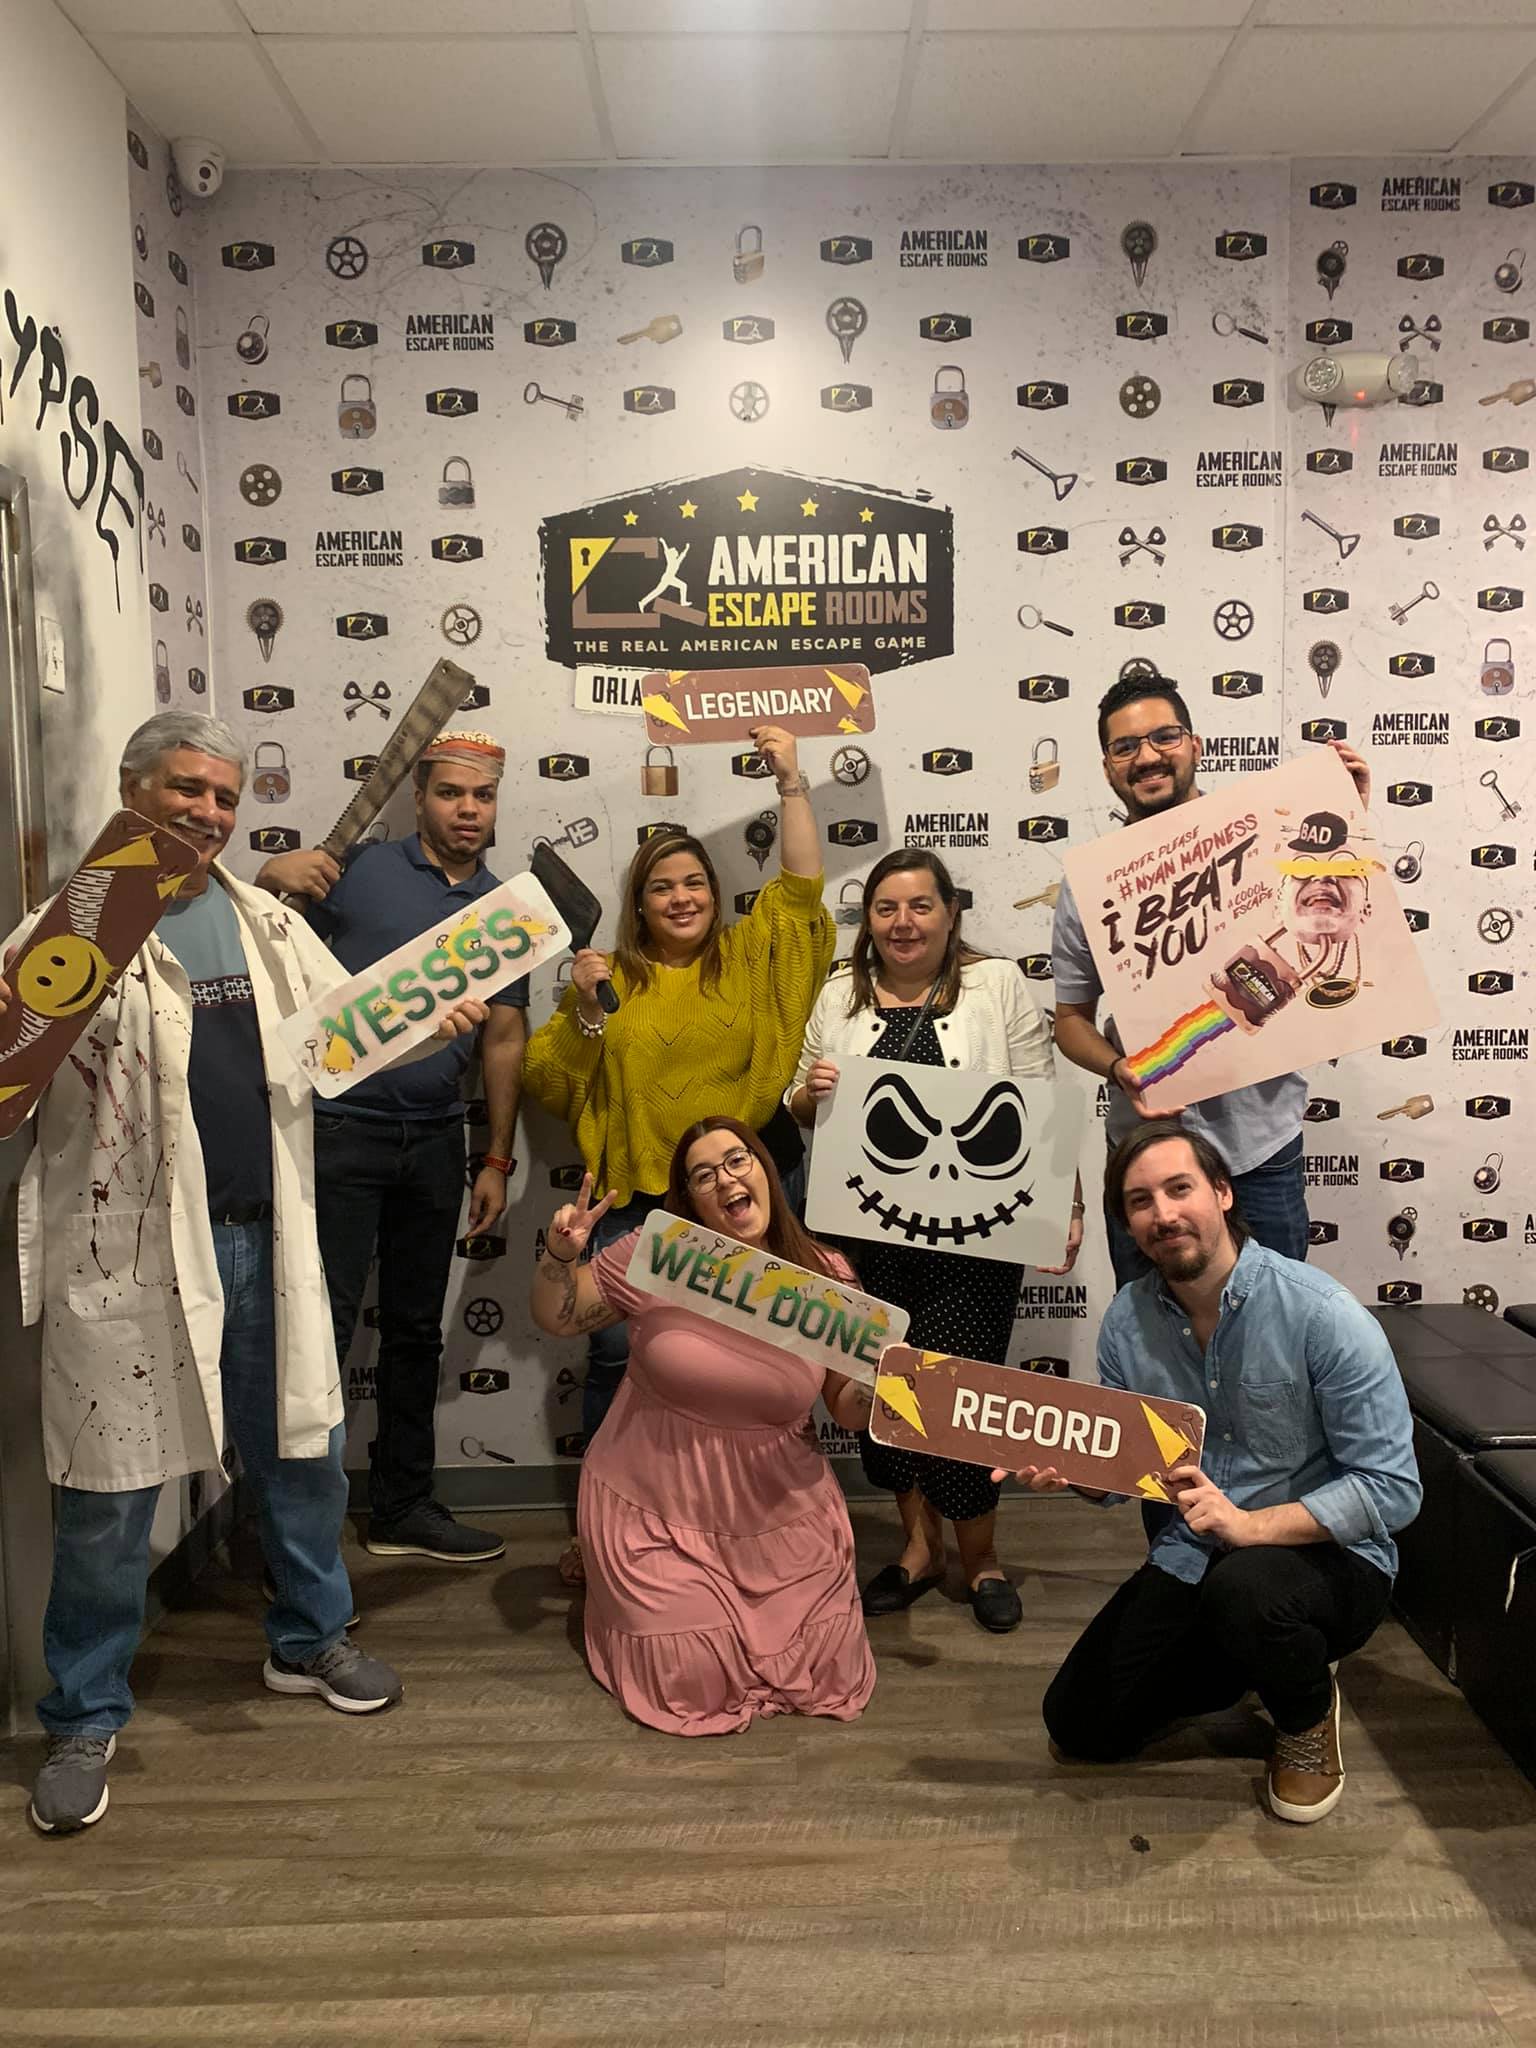 Team Gecko Monkeys played the Mad Professor's Asylum - Orlando and finished the game with 13 minutes 55 seconds left. Congratulations! Well done!